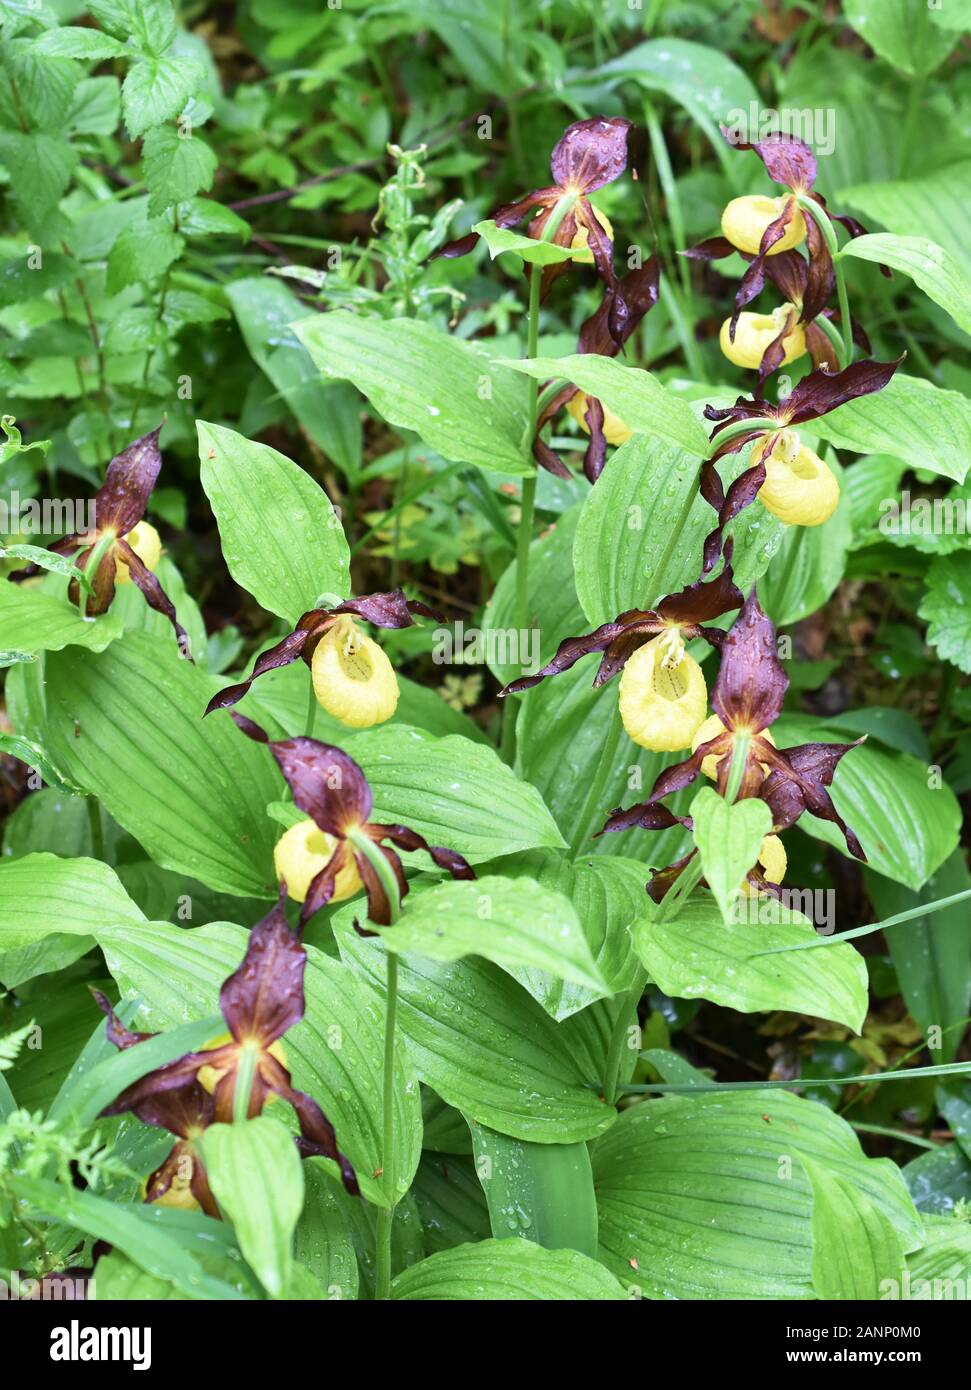 Large group of lady's-slipper orchid flowers Cypripedium calceolus in Nature Stock Photo